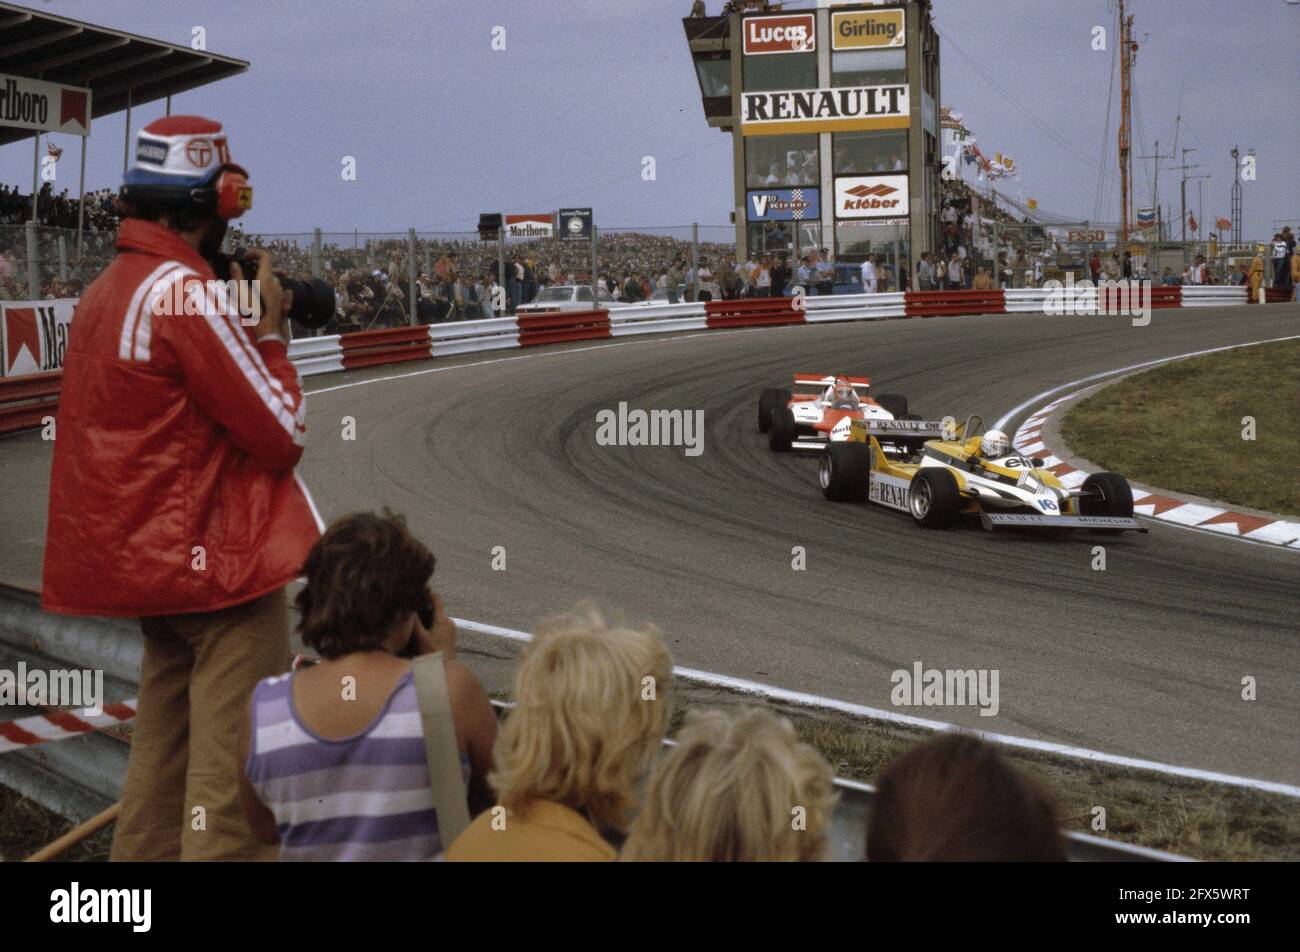 Grand Prix of the Netherlands at circuit of Zandvoort; nr. 2, Rene Arnoux in front of action, nr. 3, Carlos Reutemann behind Jacques Laffite, August 30 1981, car races, The Netherlands, 20th century press agency photo, news to remember, documentary, historic photography 1945-1990, visual stories, human history of the Twentieth Century, capturing moments in time Stock Photo